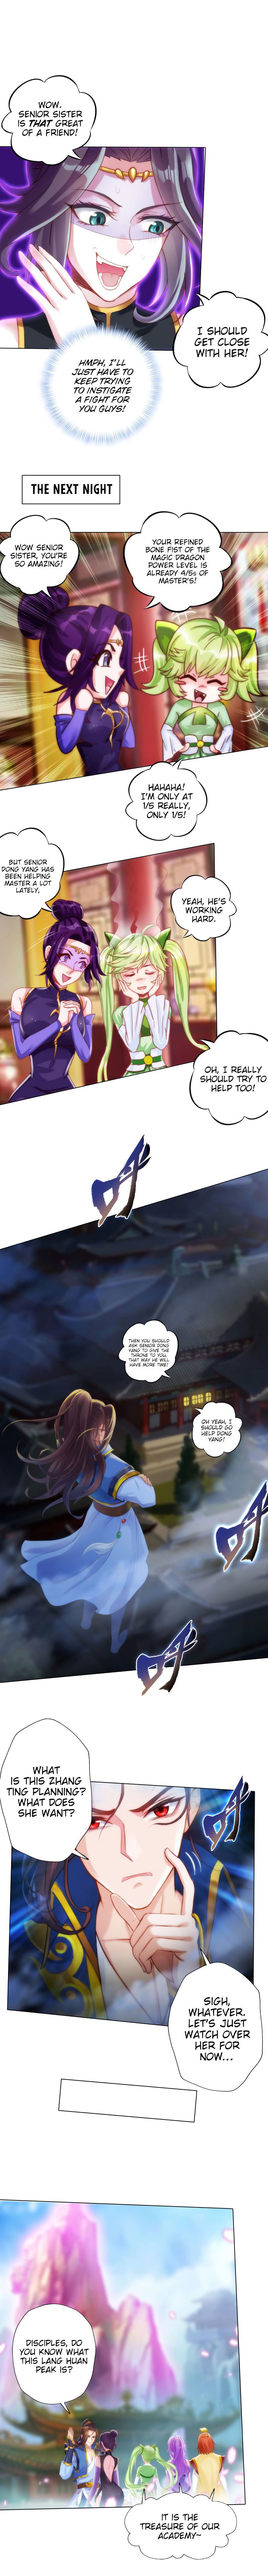 Lang Huan Library Chapter 40 page 10